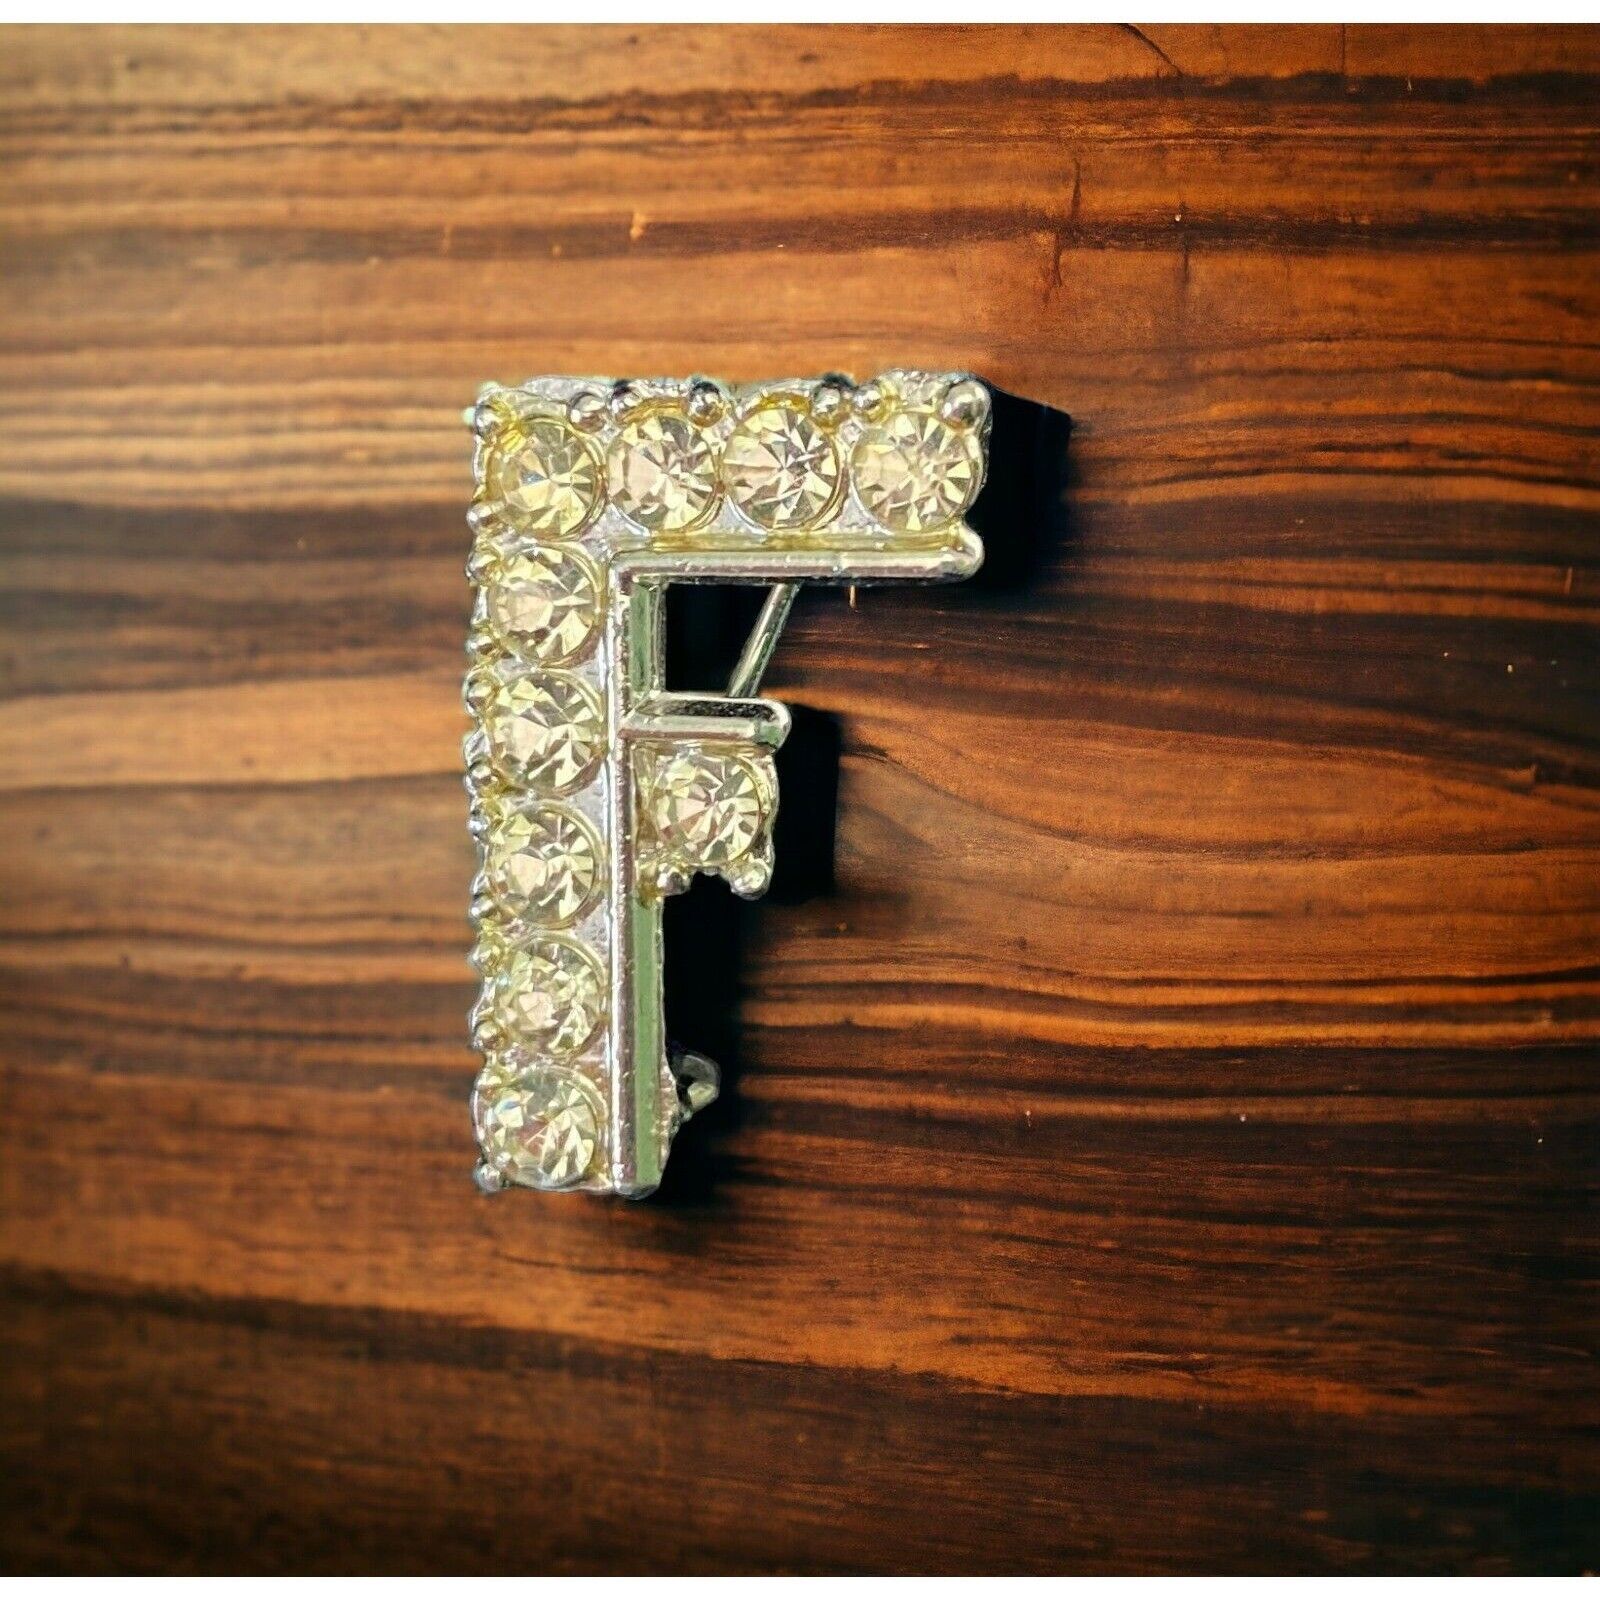 Primary image for Vintage Capital Letter F Rhinestone Brooch Costume Pin Silver Tone Faux Diamond